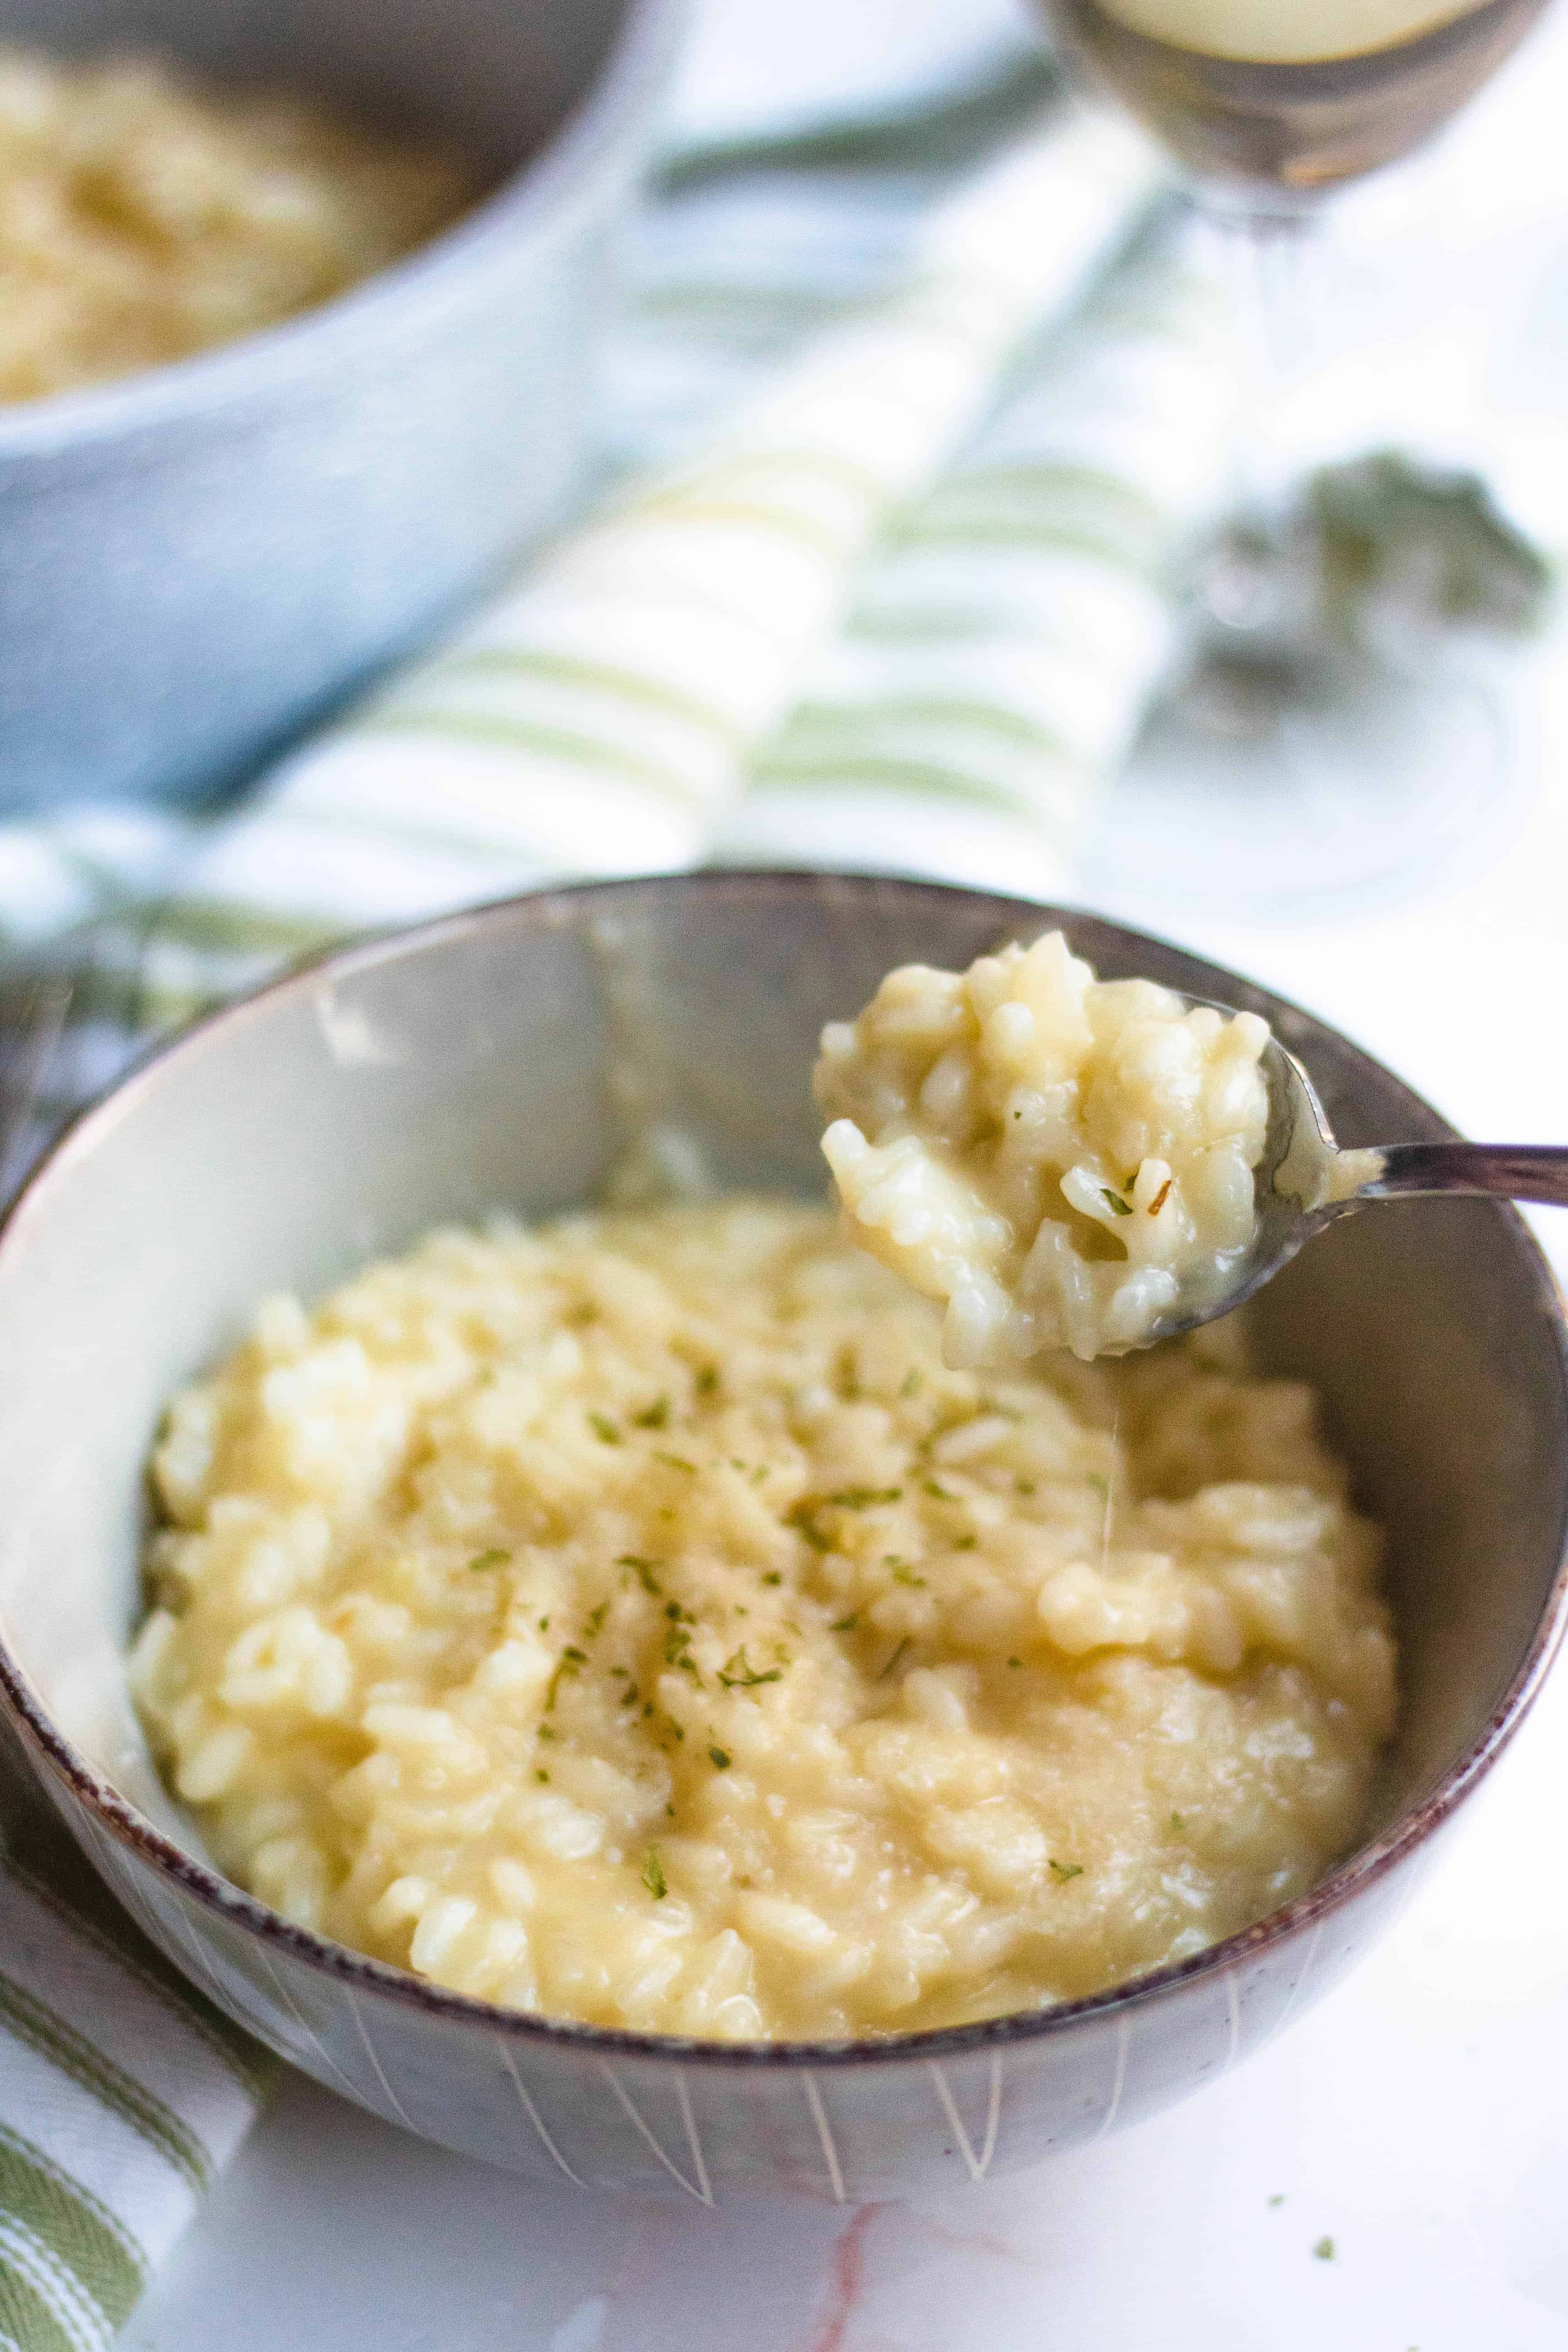 Spoonful of Parmesan risotto over a bowlful of the creamy risotto.